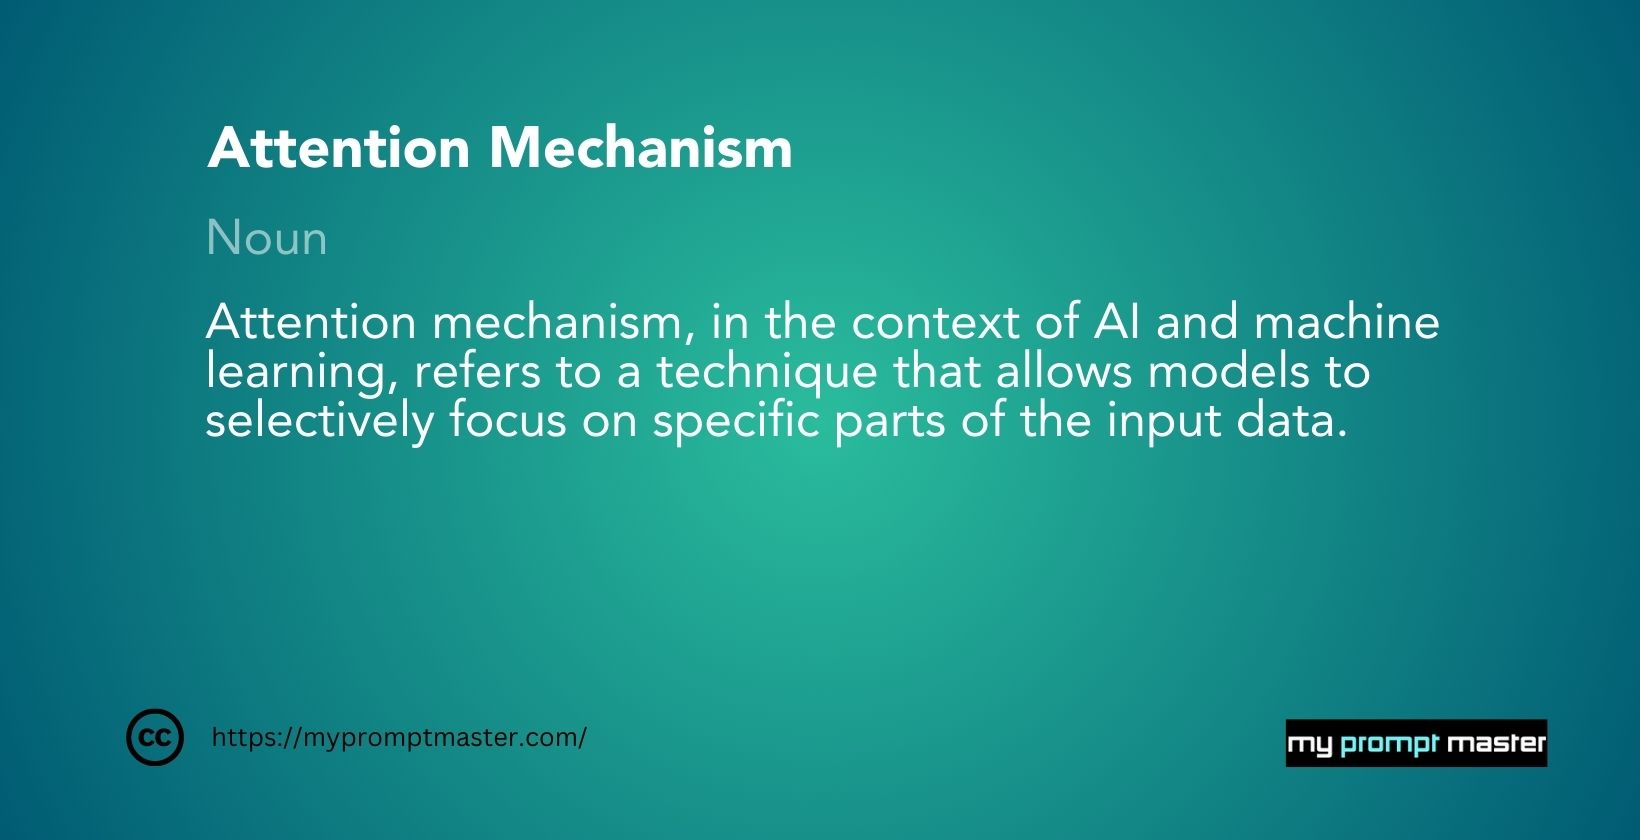 What is Attention Mechanism